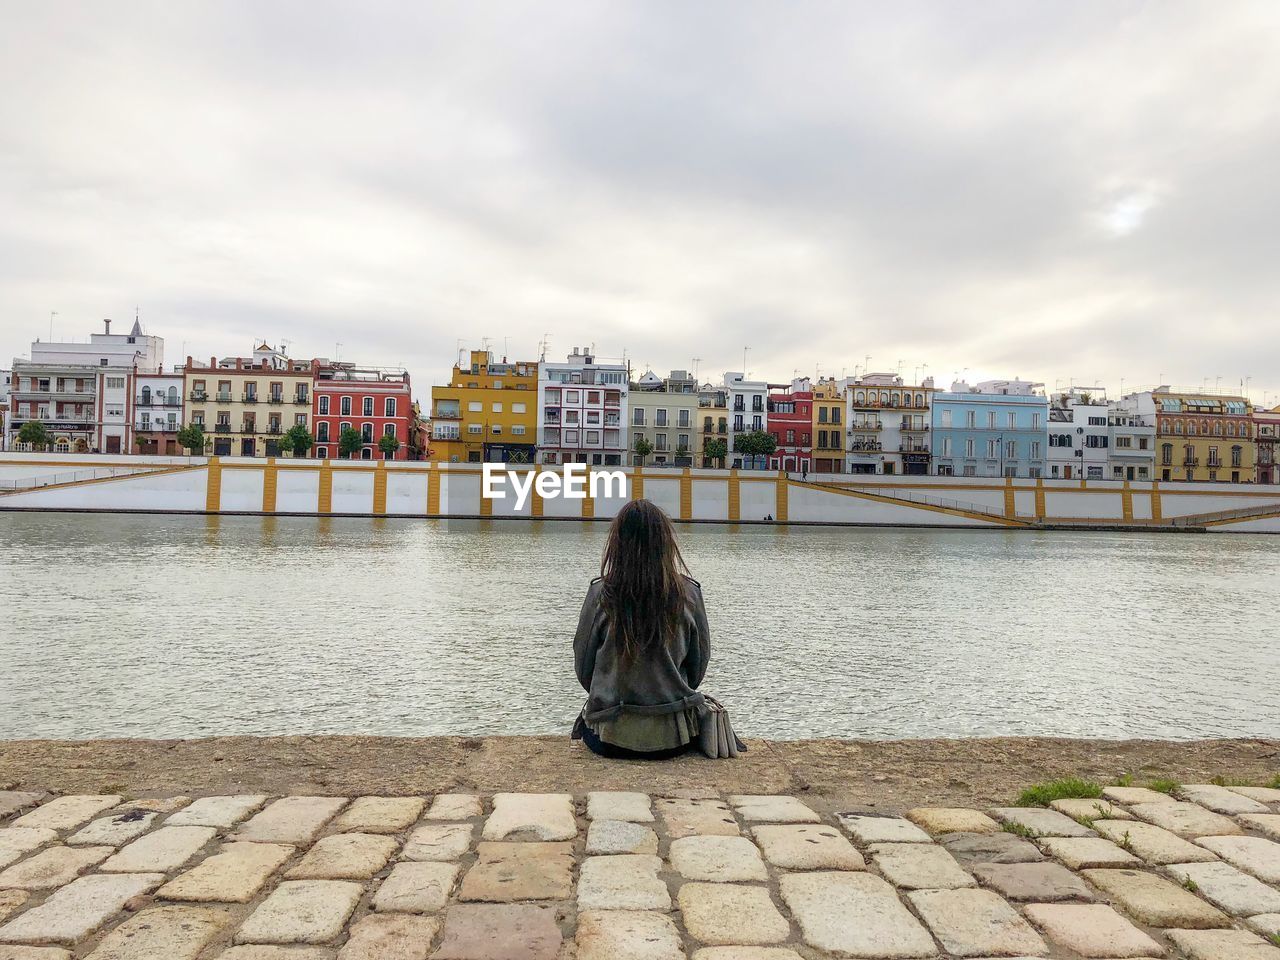 Rear view of woman looking at river against buildings in city